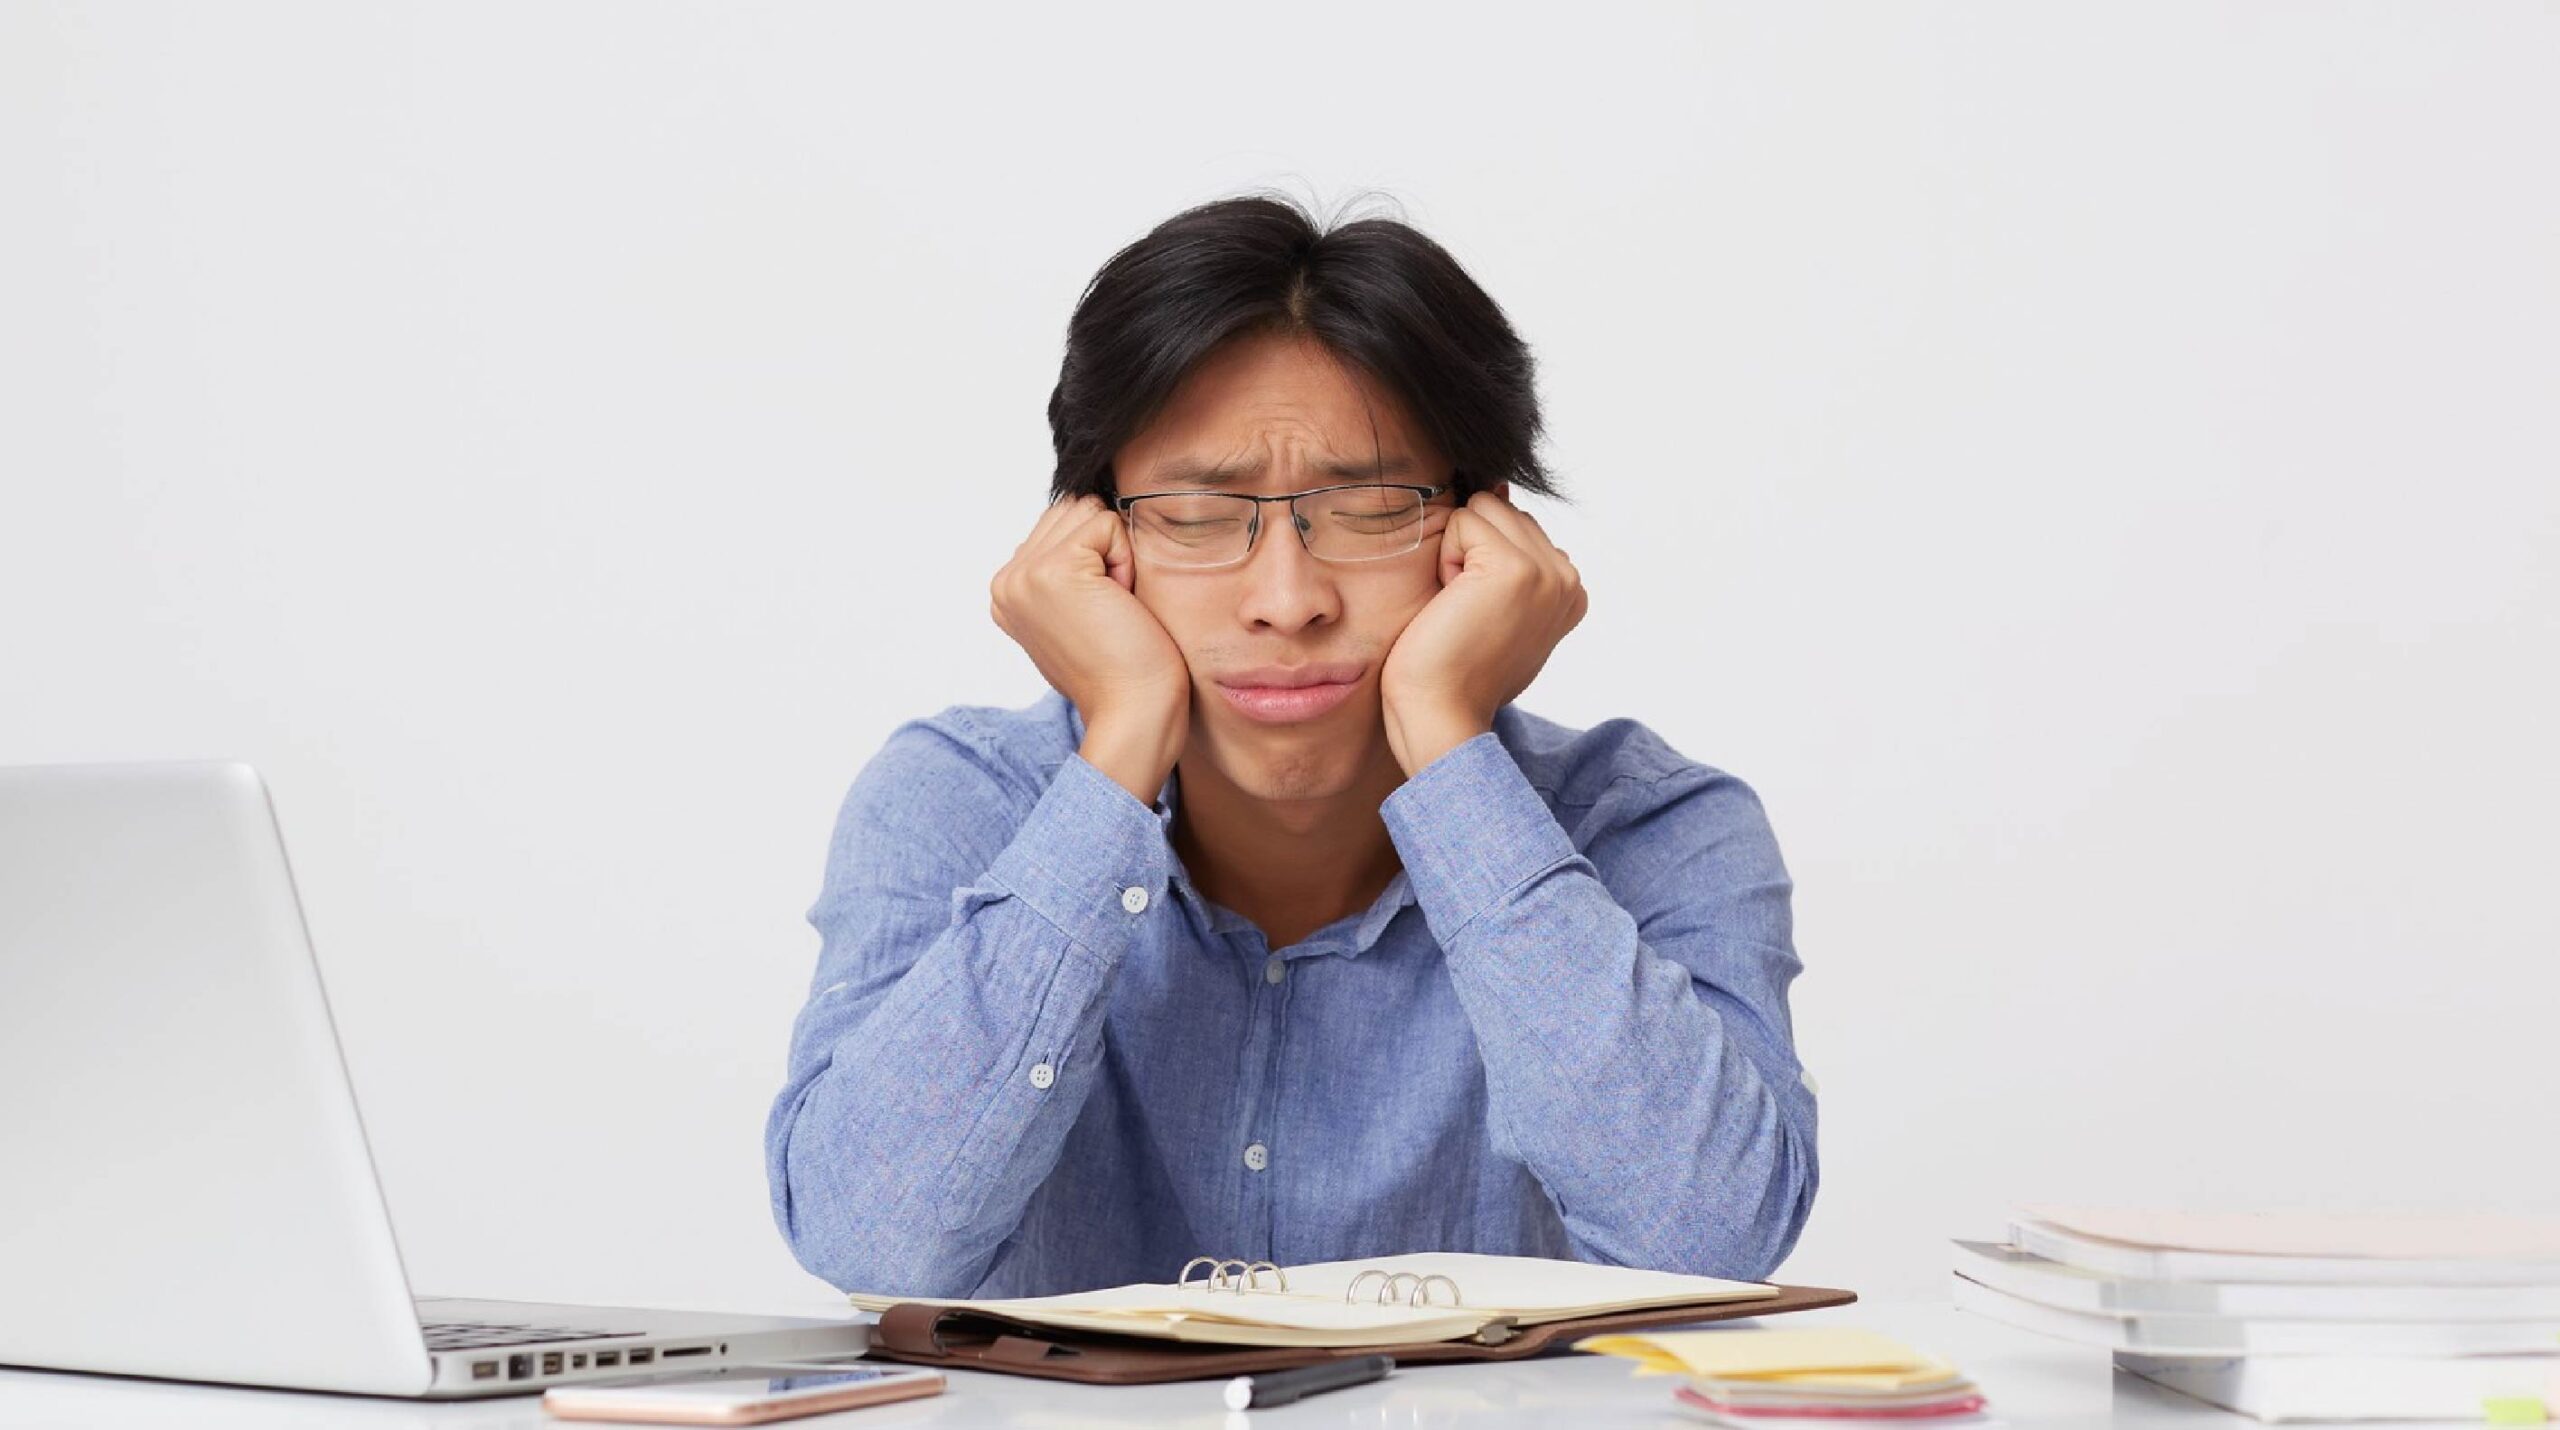 Are you over working? Here is the 10 signs that indicate you are over fatigue